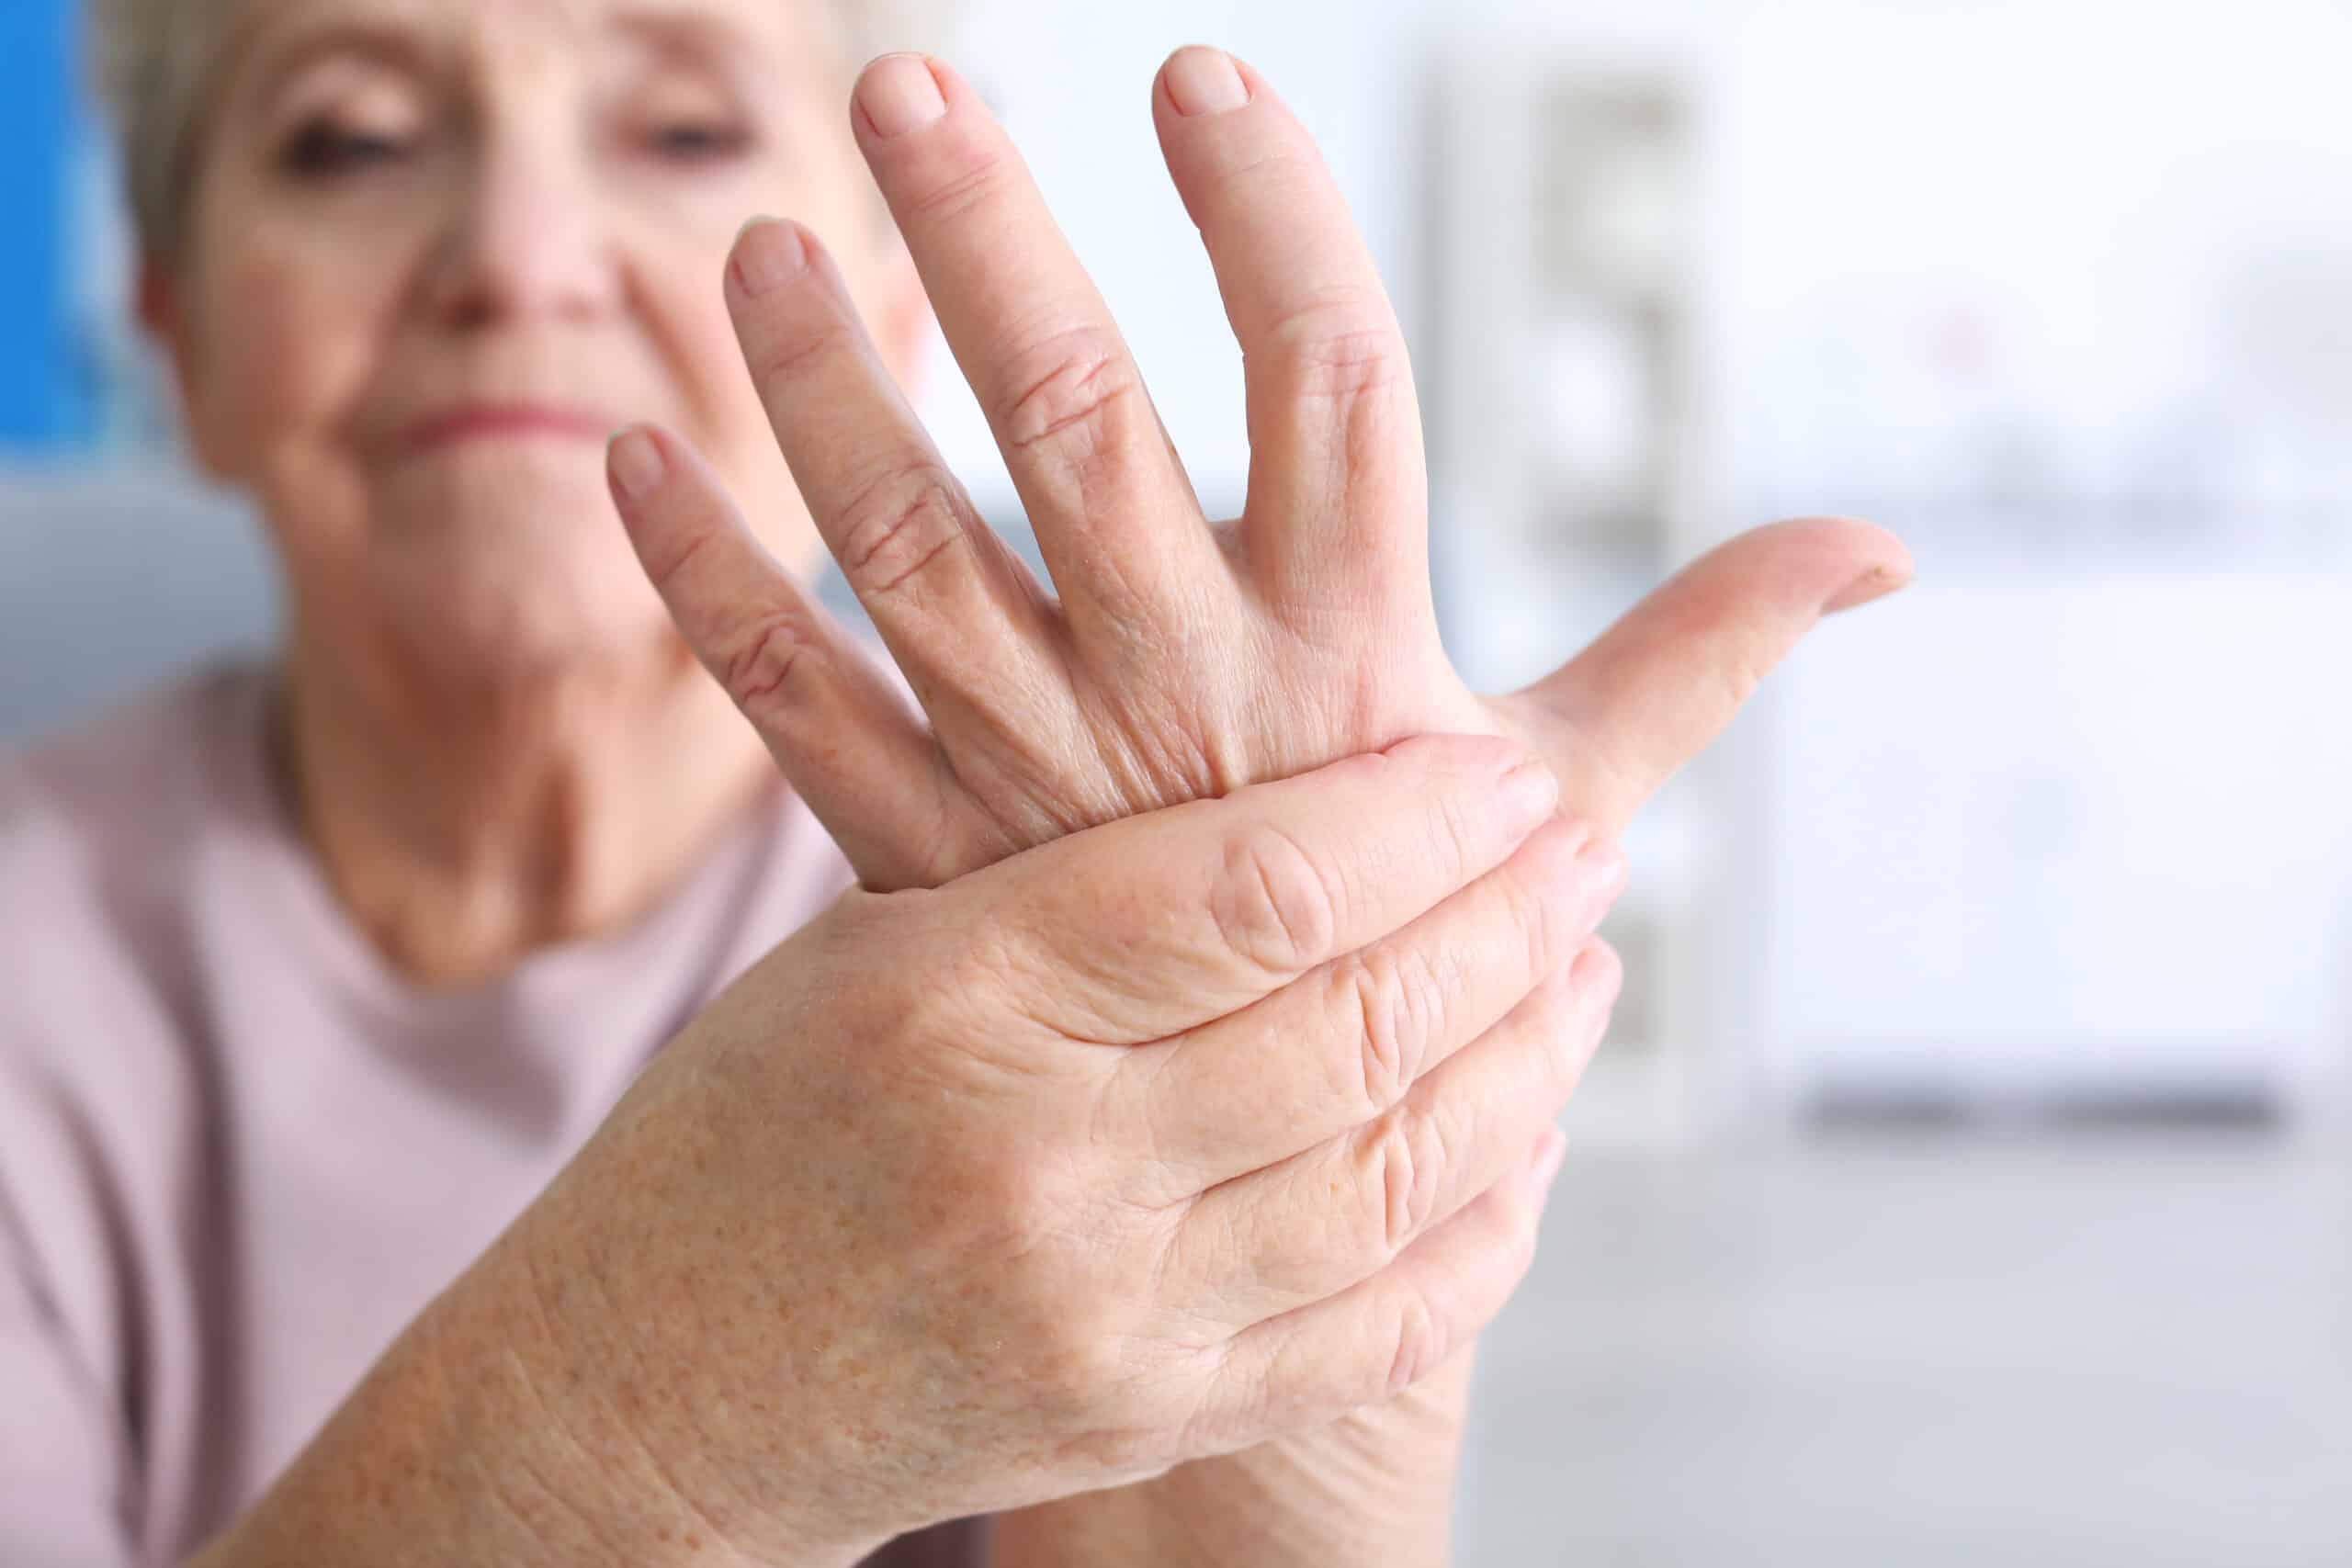 Chronic inflammatory diseases such as arthritis result in swollen and inflamed joints and soft tissue.